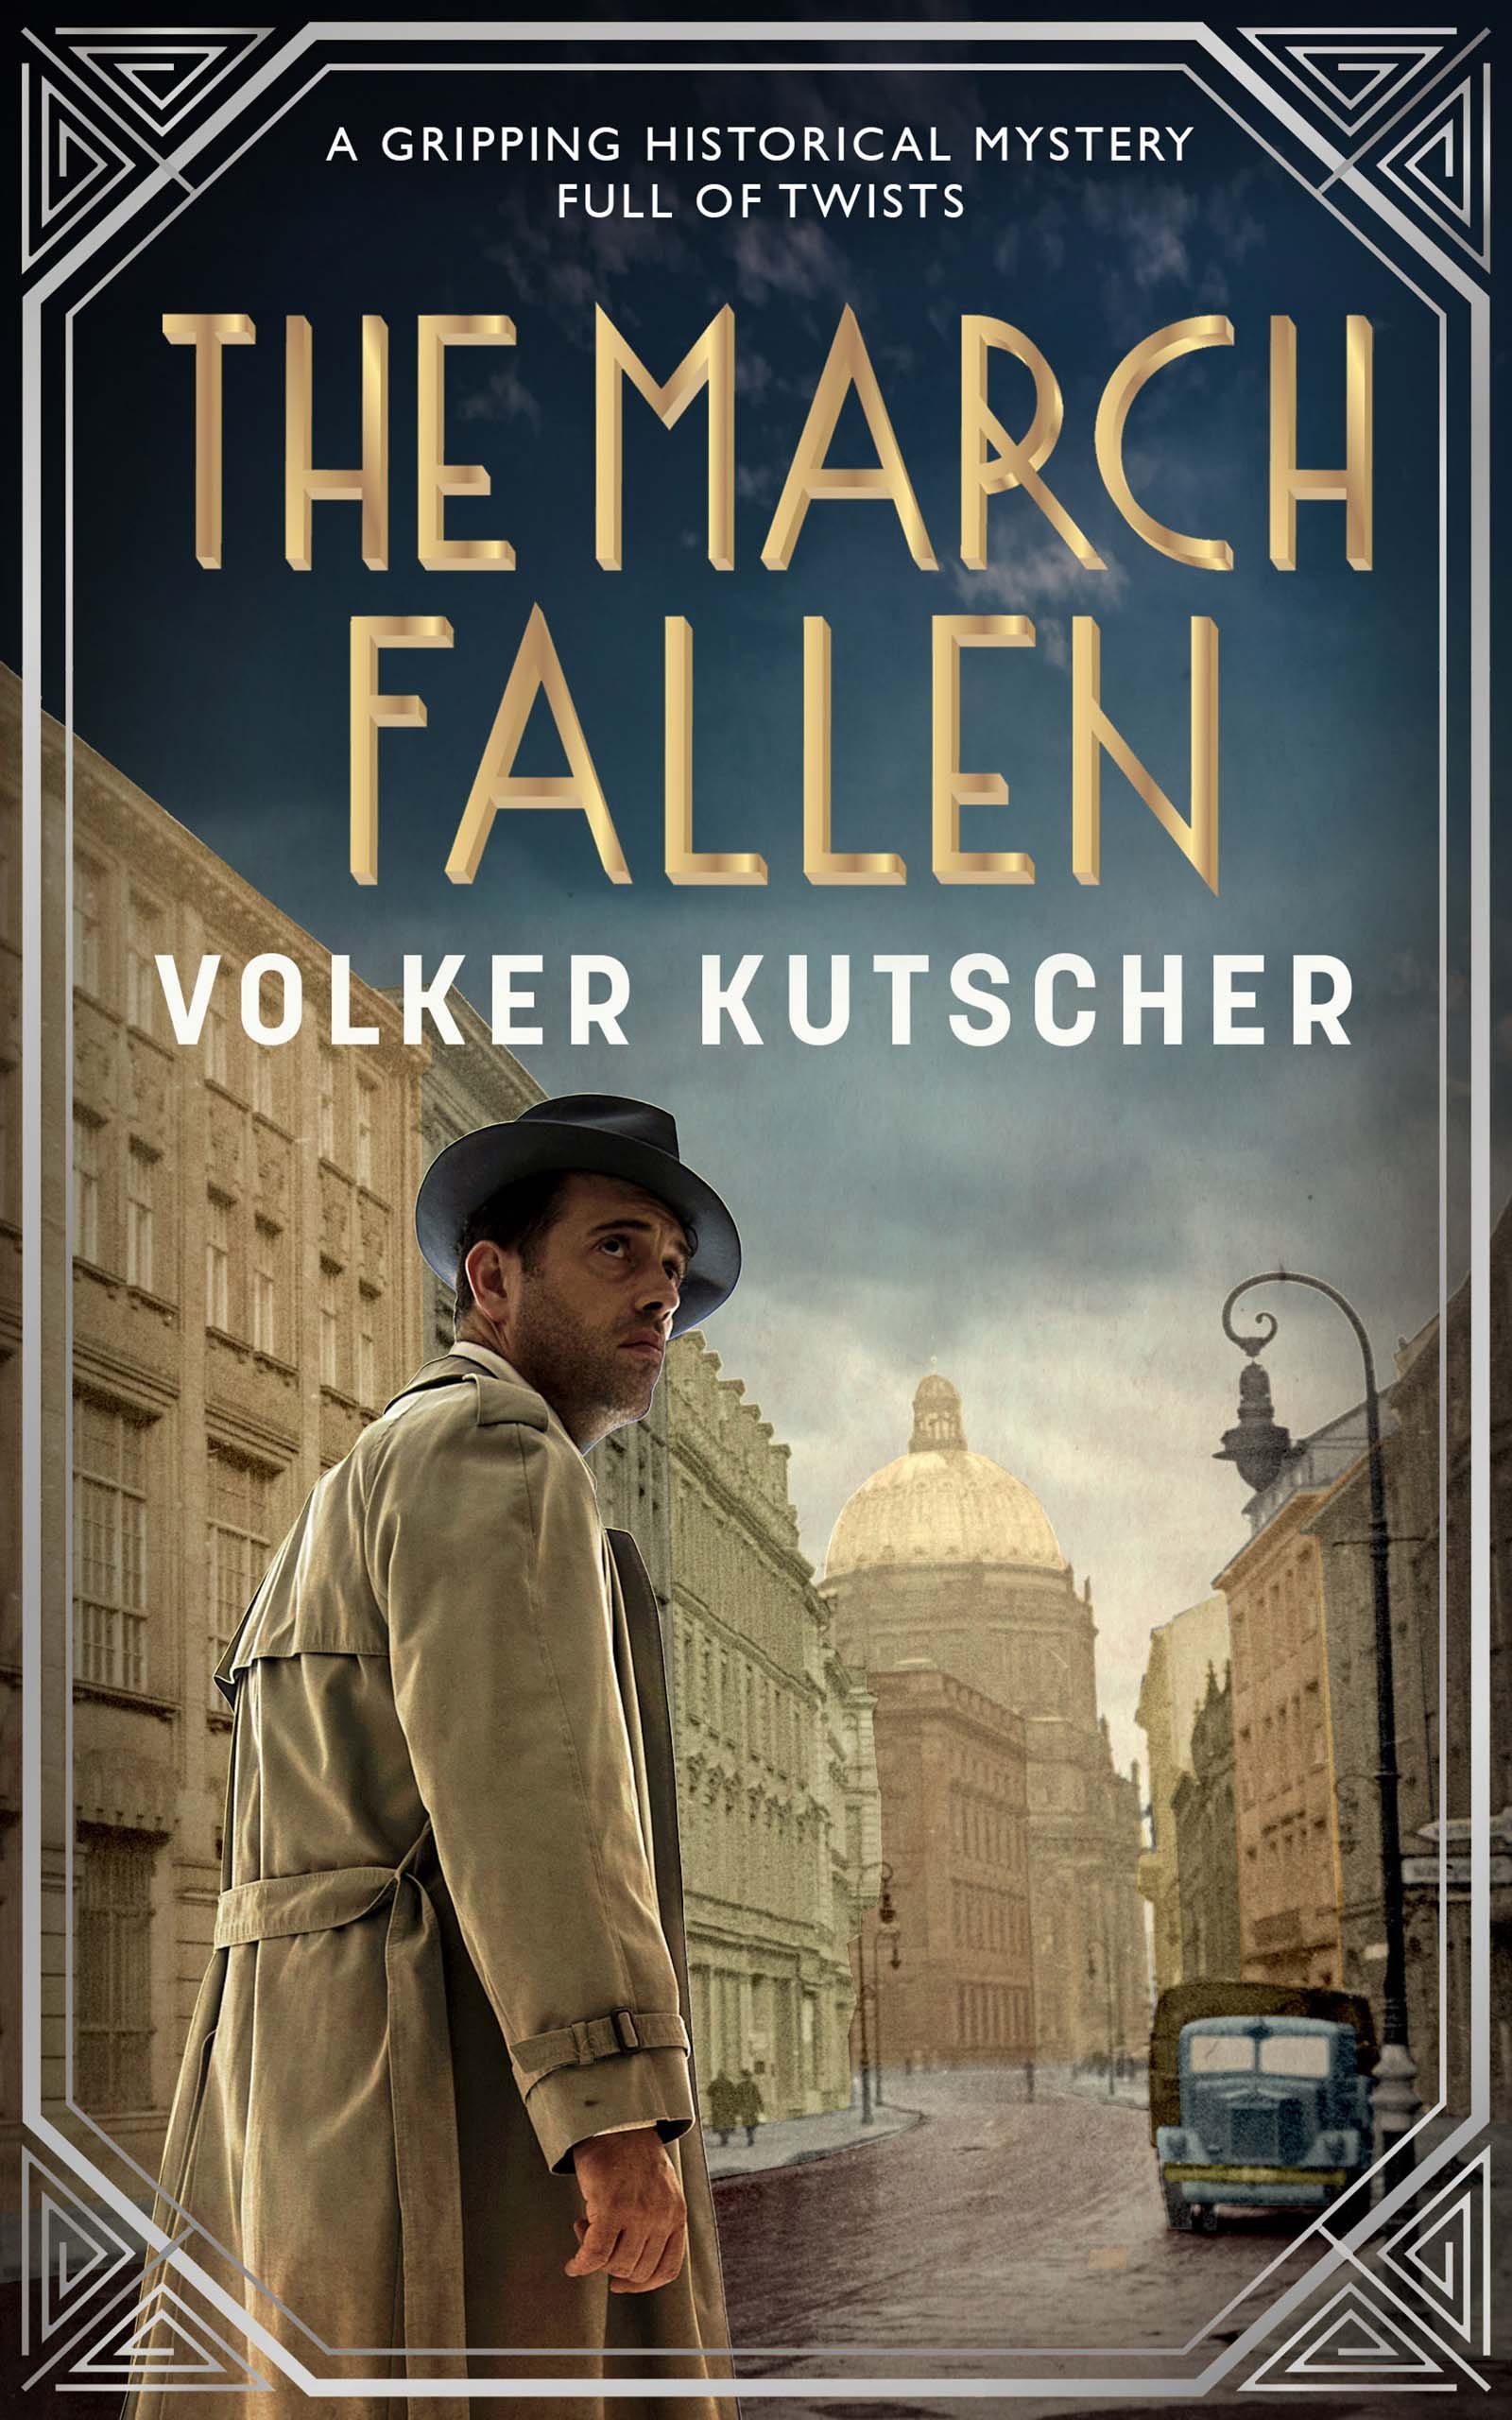 THE MARCH FALLEN Cover publish.jpg